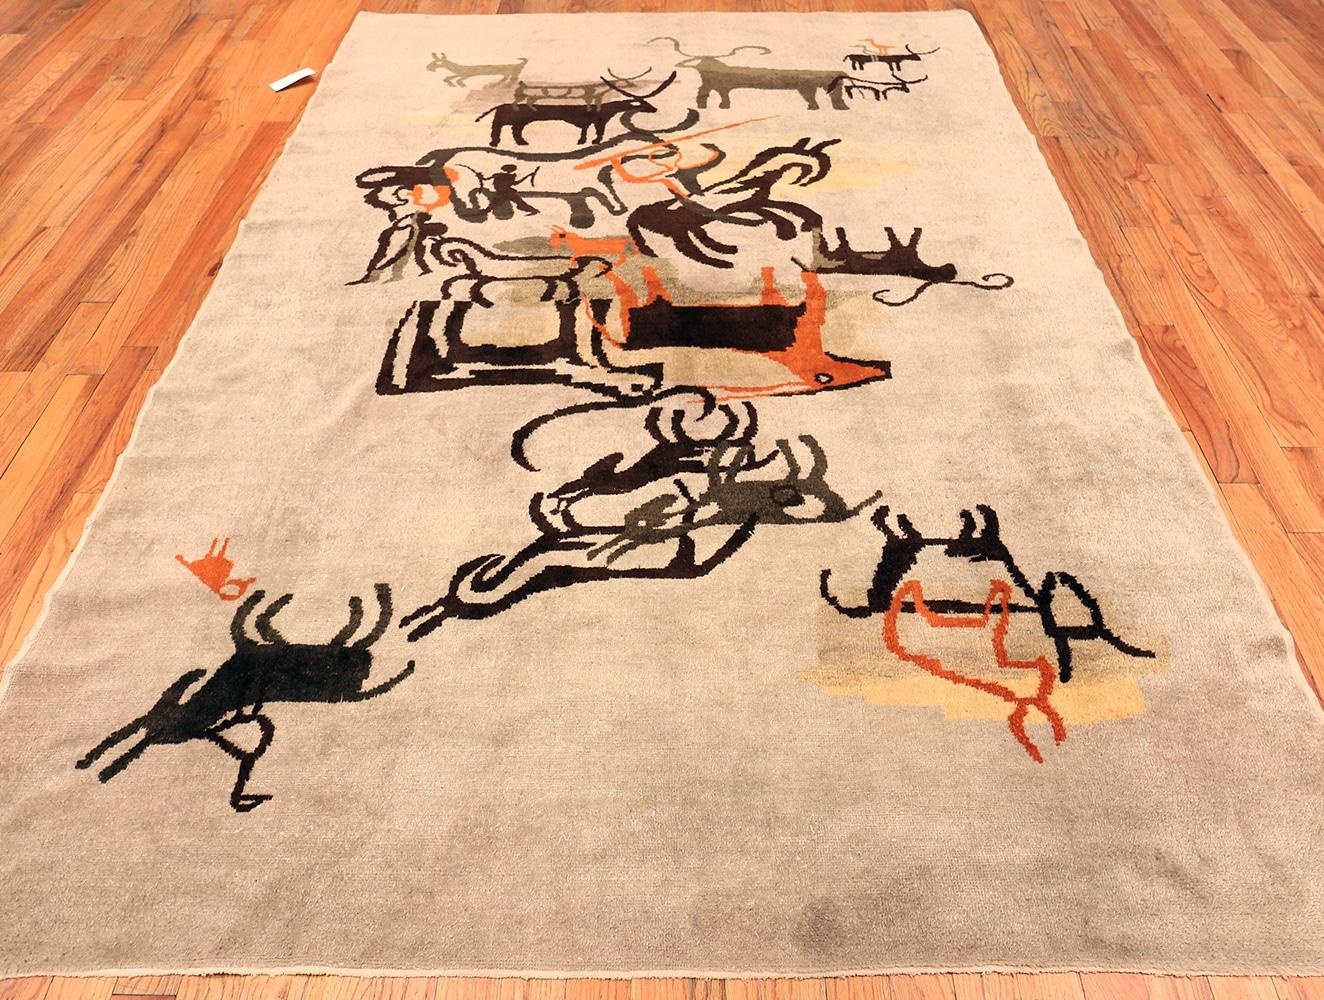 Stunning vintage Ecuadorian rug by Olga Fisch, origin: Ecuador, circa mid-20th century. Size: 6 ft 10 in x 10 ft 4 in (2.08 m x 3.15 m)

Olga Fisch was an inspired artist of the mid-twentieth century who created pieces that were reflective of the